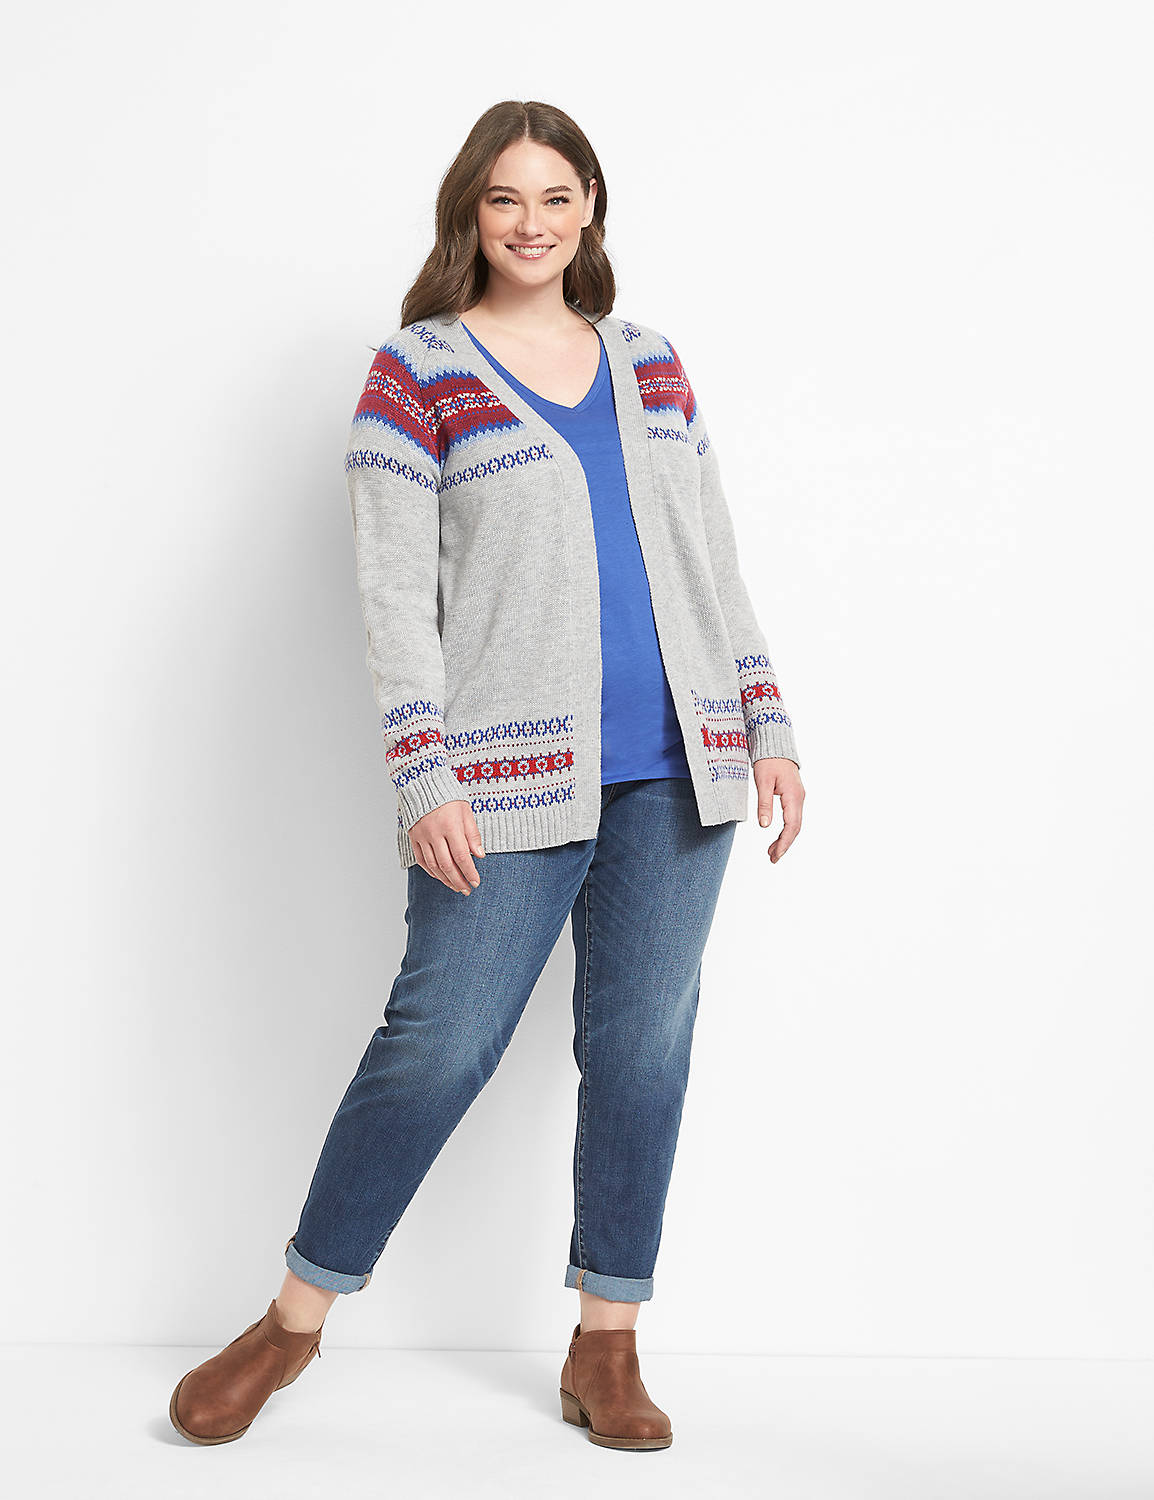 Long Sleeve Open Front Placed Fairisle Overpiece 1124478:BC04 Heather grey:10/12 Product Image 3